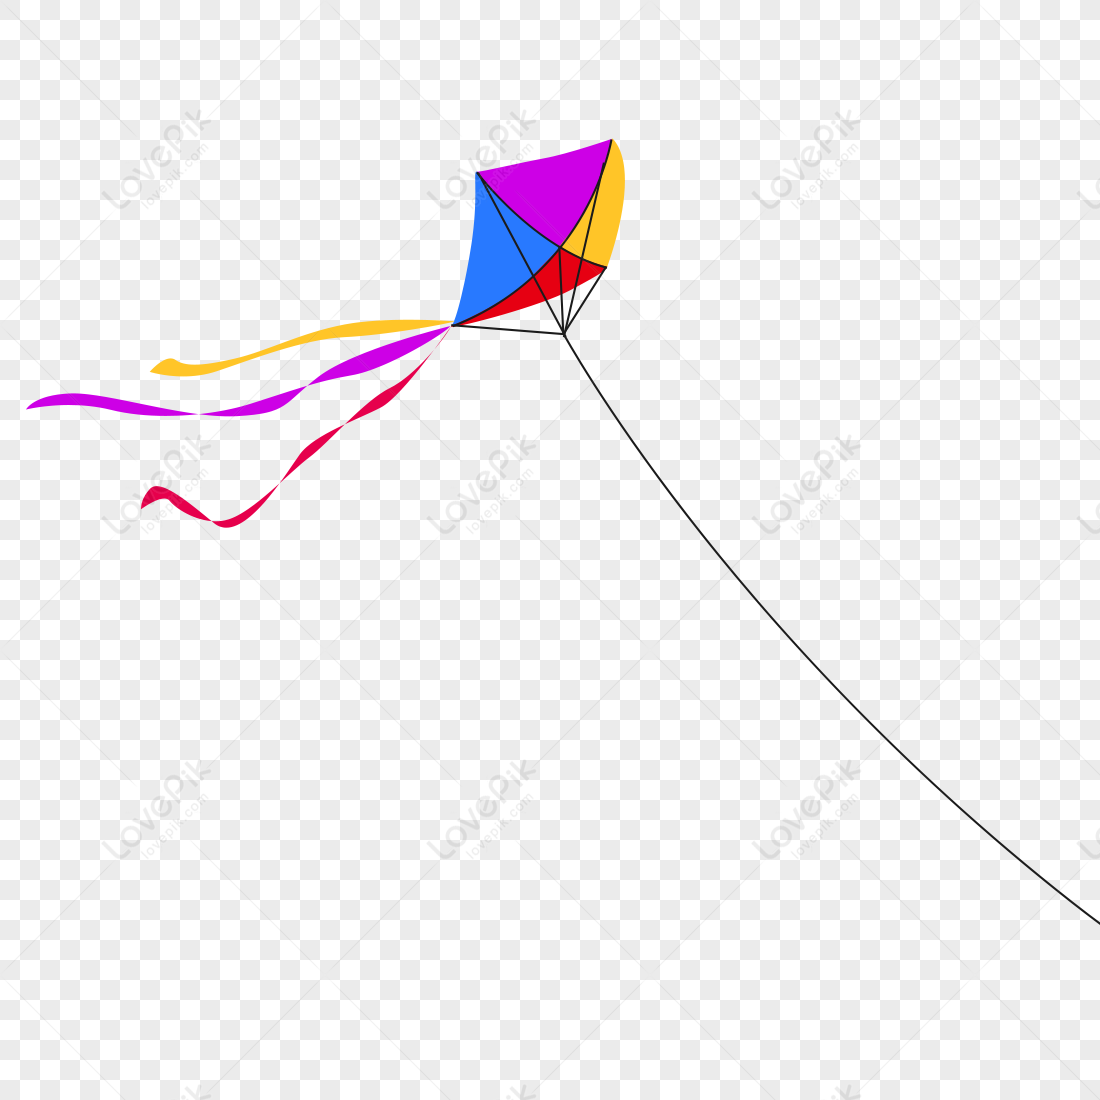 Fly A Kite PNG Transparent Image And Clipart Image For Free Download -  Lovepik | 400197717